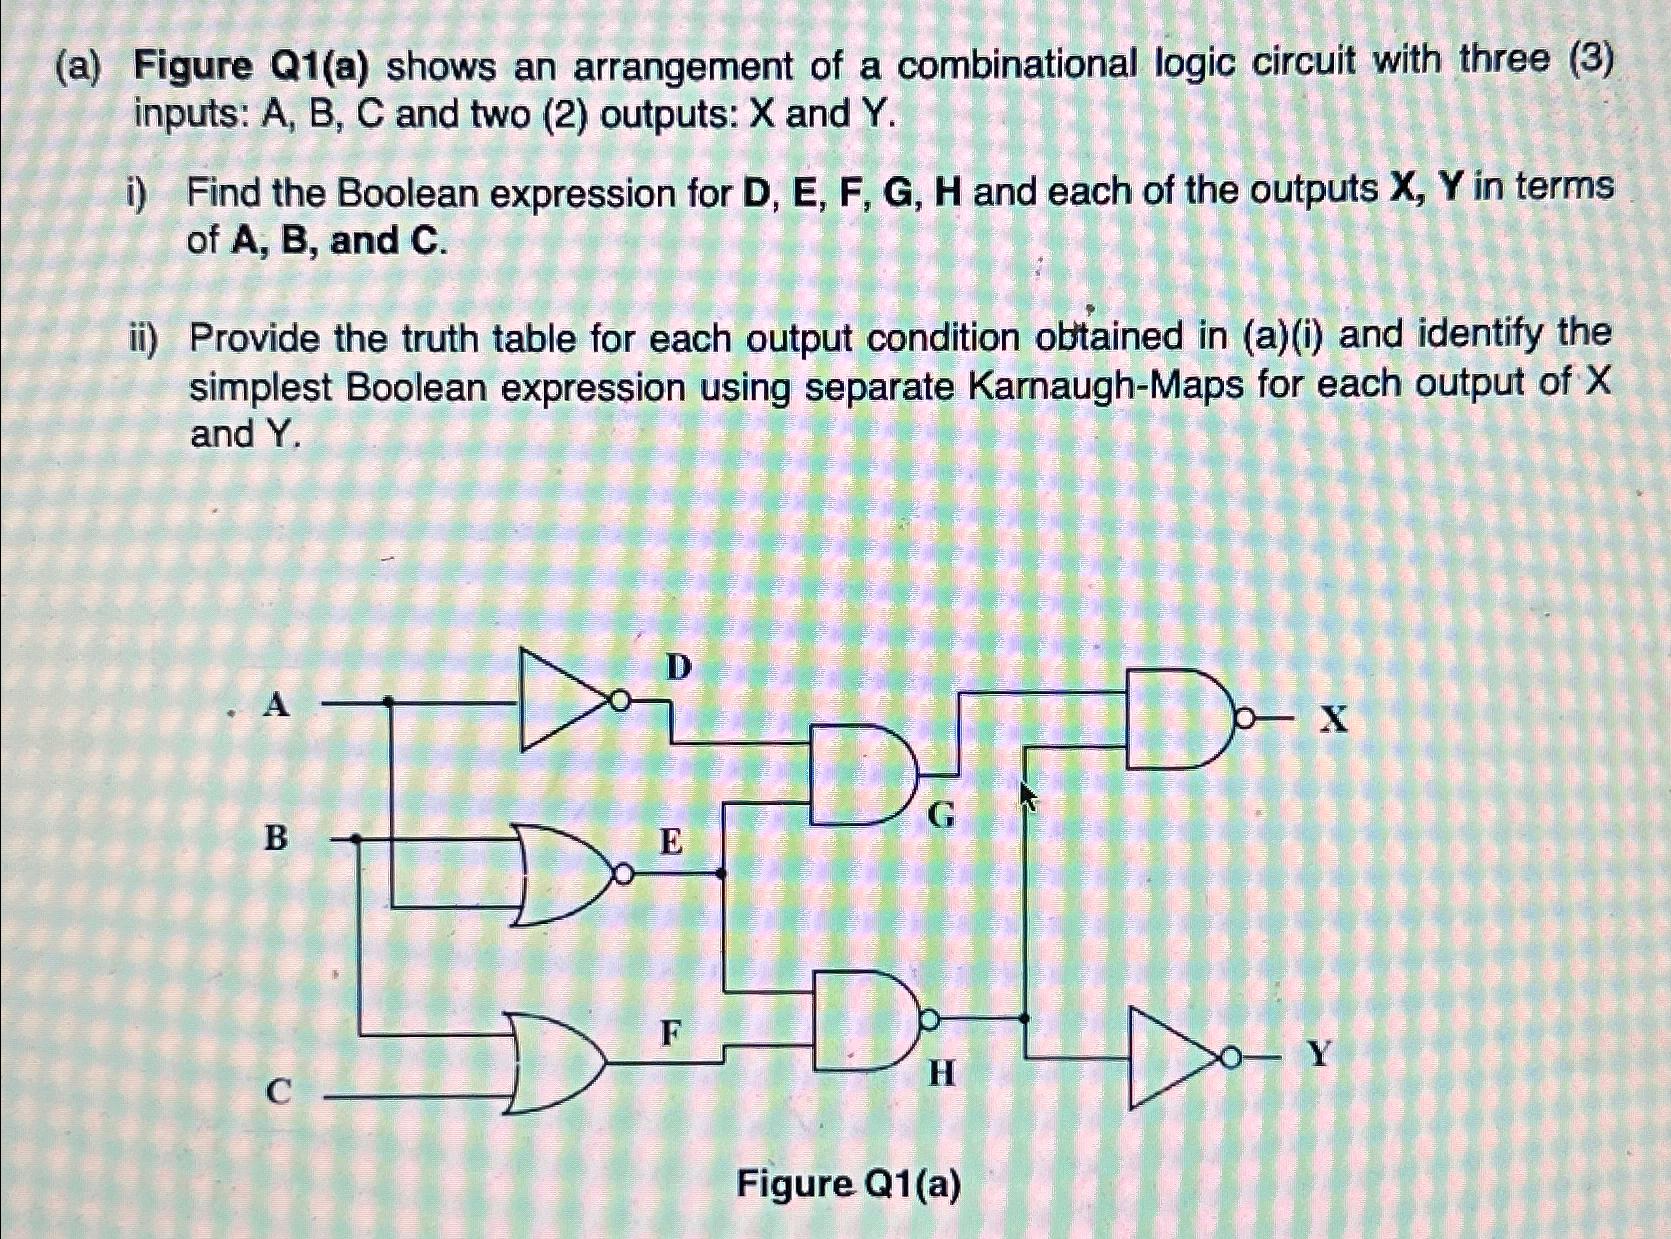 (a) Figure Q1(a) shows an arrangement of a combinational logic circuit with three (3) inputs: A, B, C and two